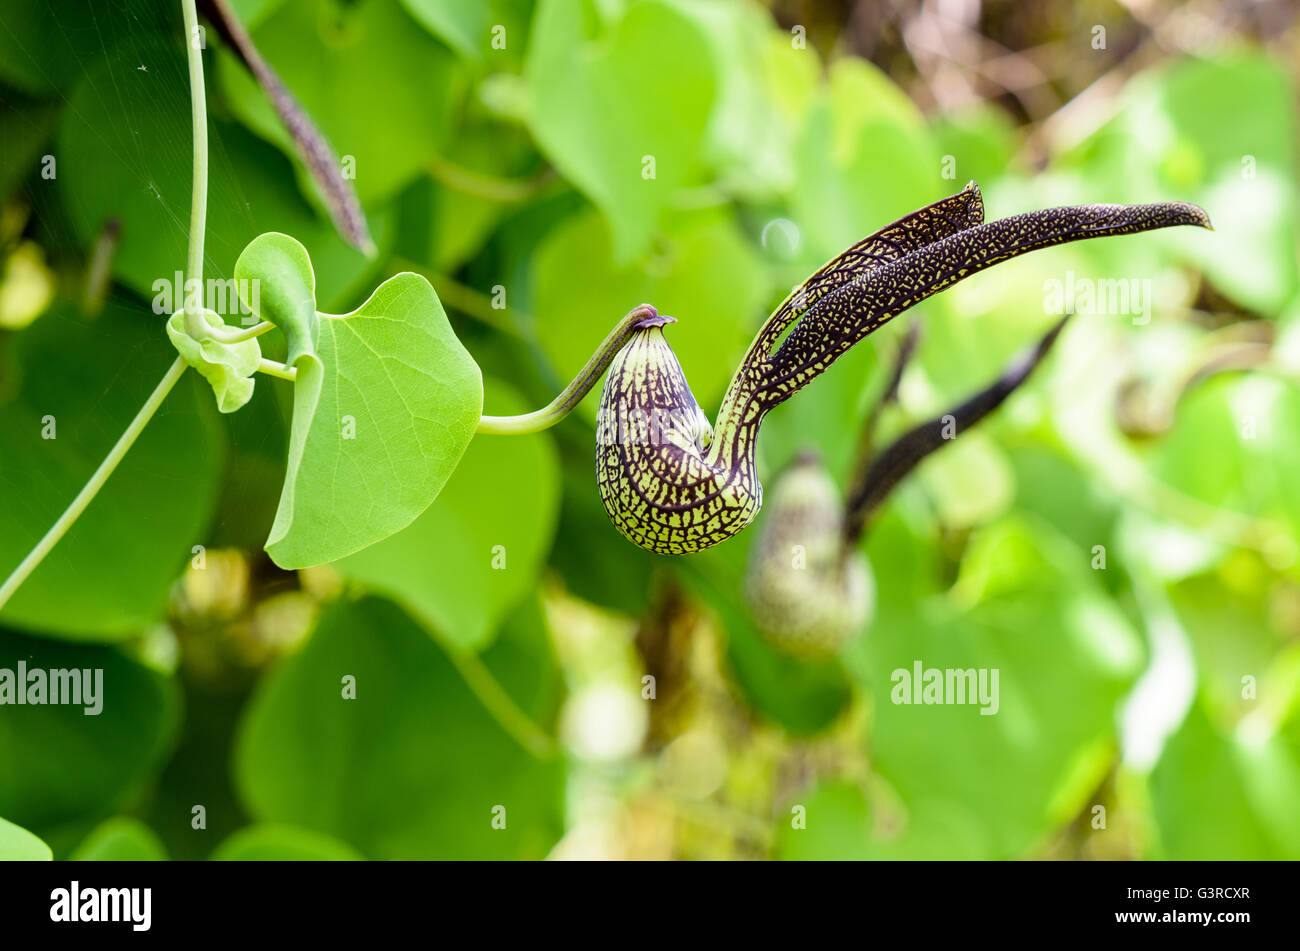 Exotic green flower striped black shaped like a chicken. It is an ornamental plant name is Aristolochia ringens Vahl or Dutchman Stock Photo